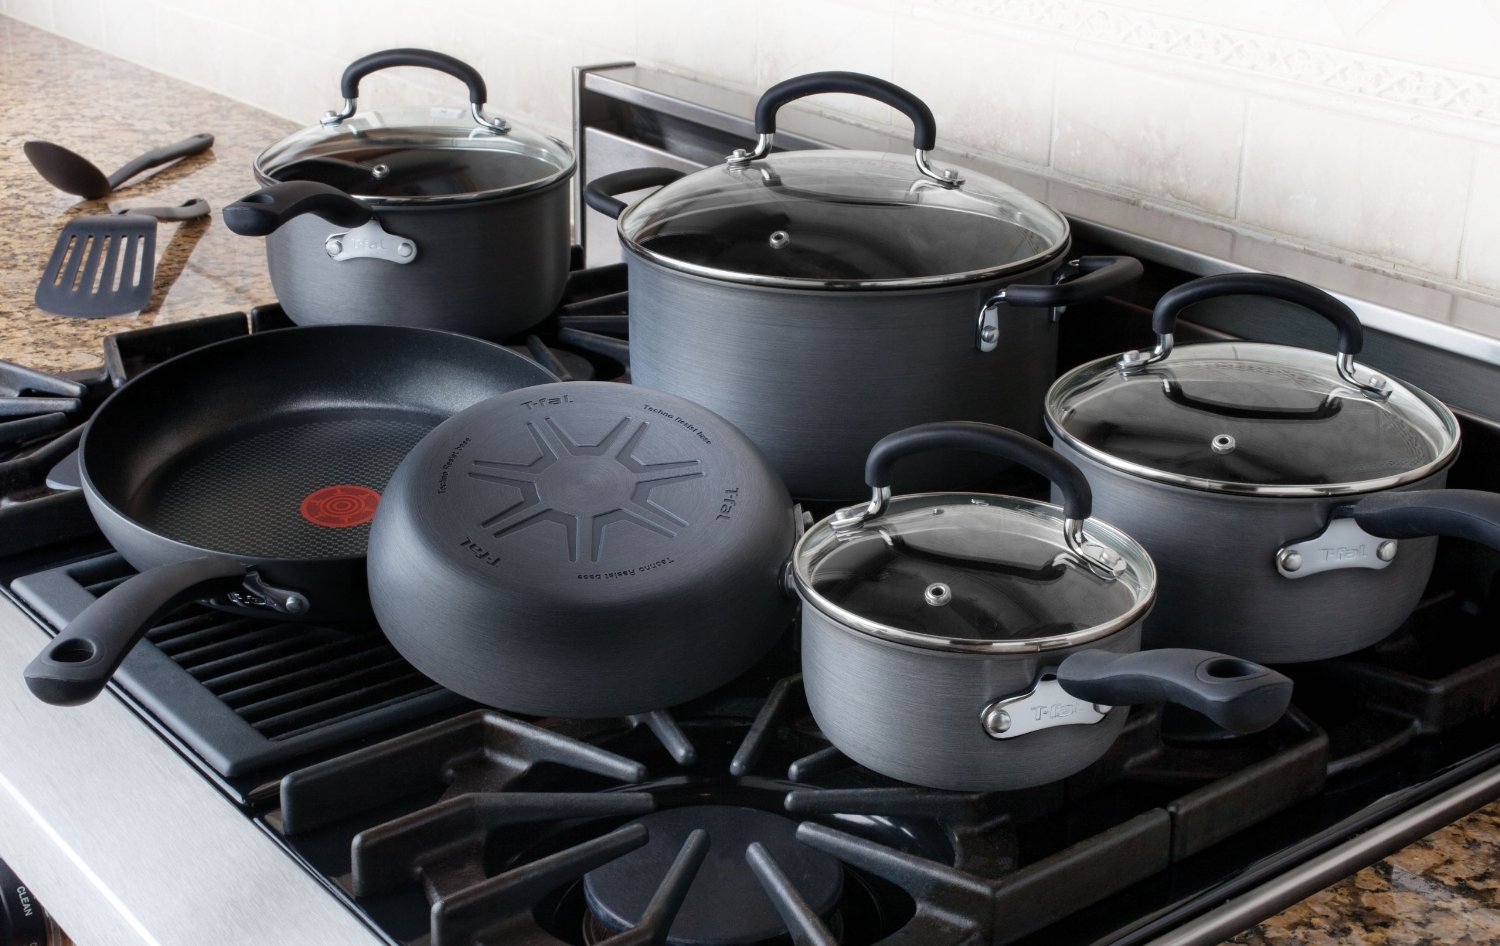 Home: T-fal's best-selling 12-pc. cookware set $80 (Orig. $150), 2